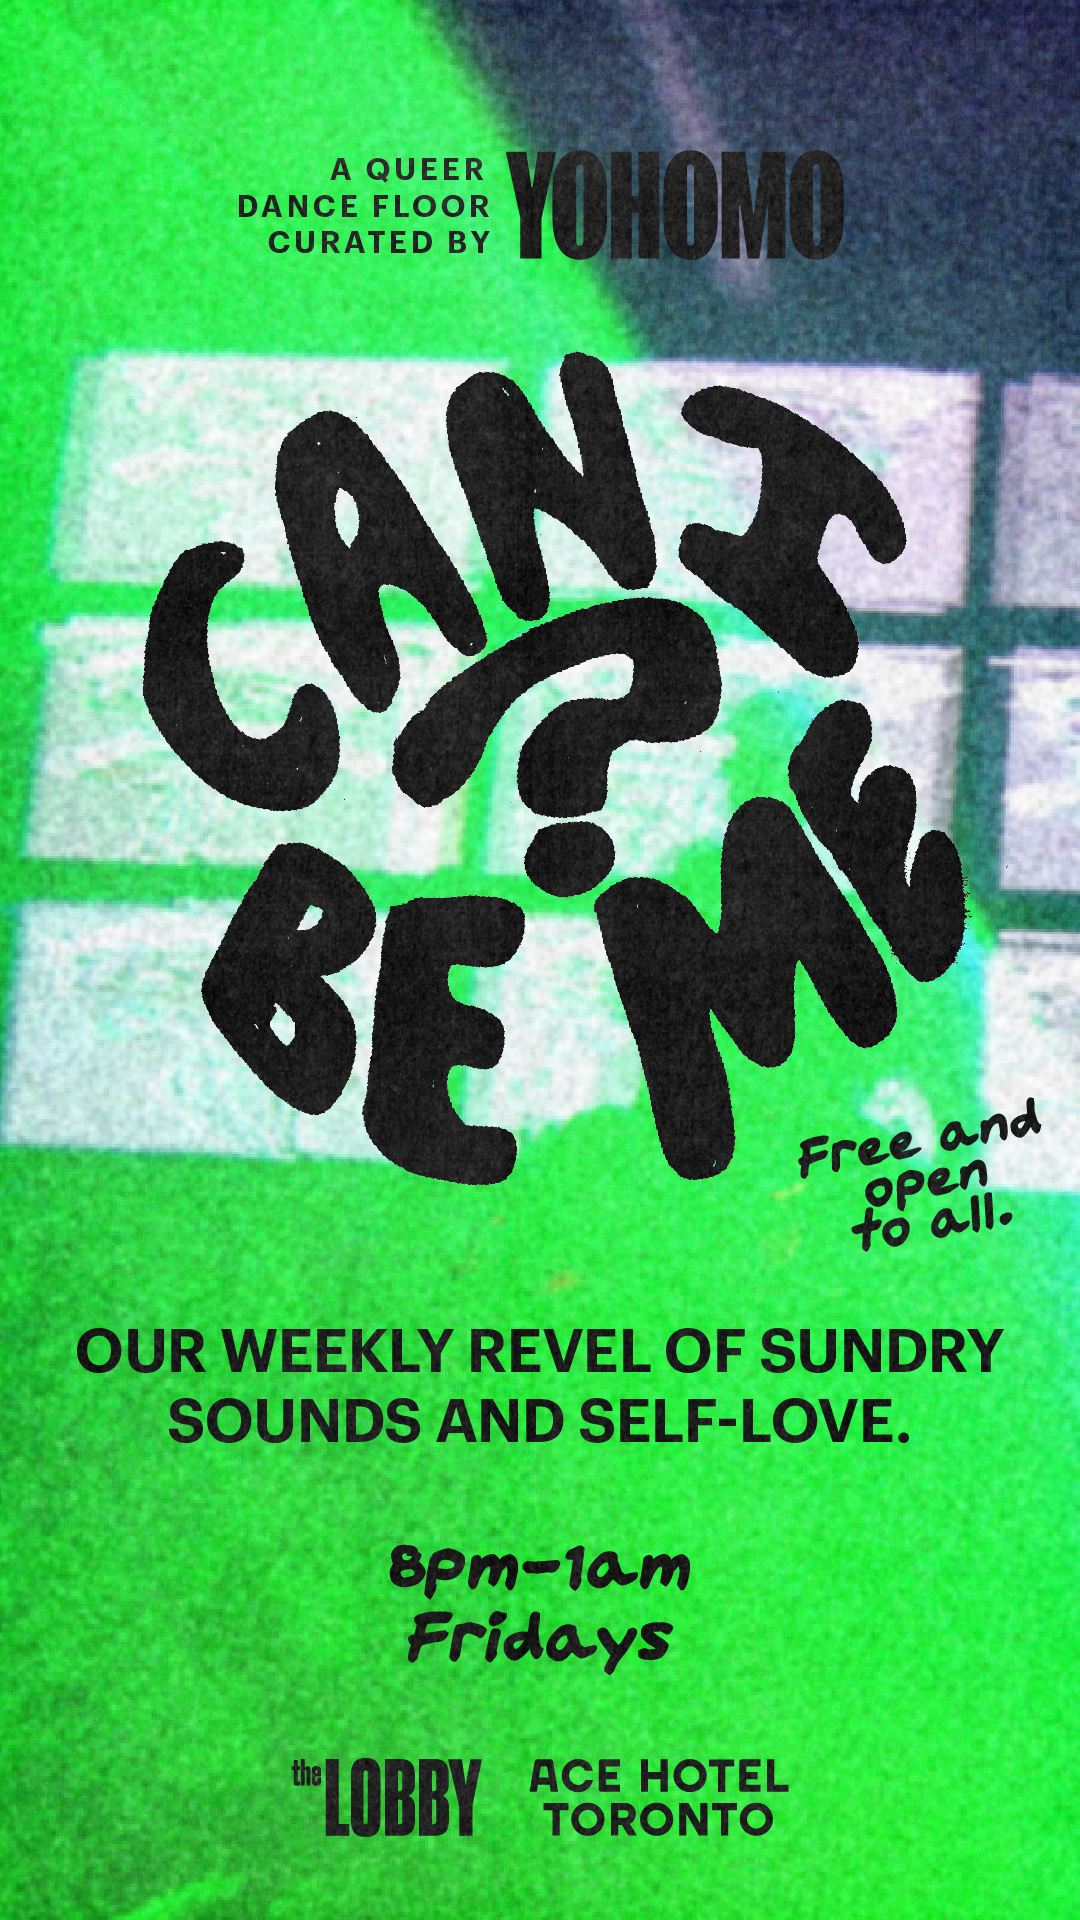 CAN I BE ME? Curated by Yohomo promo